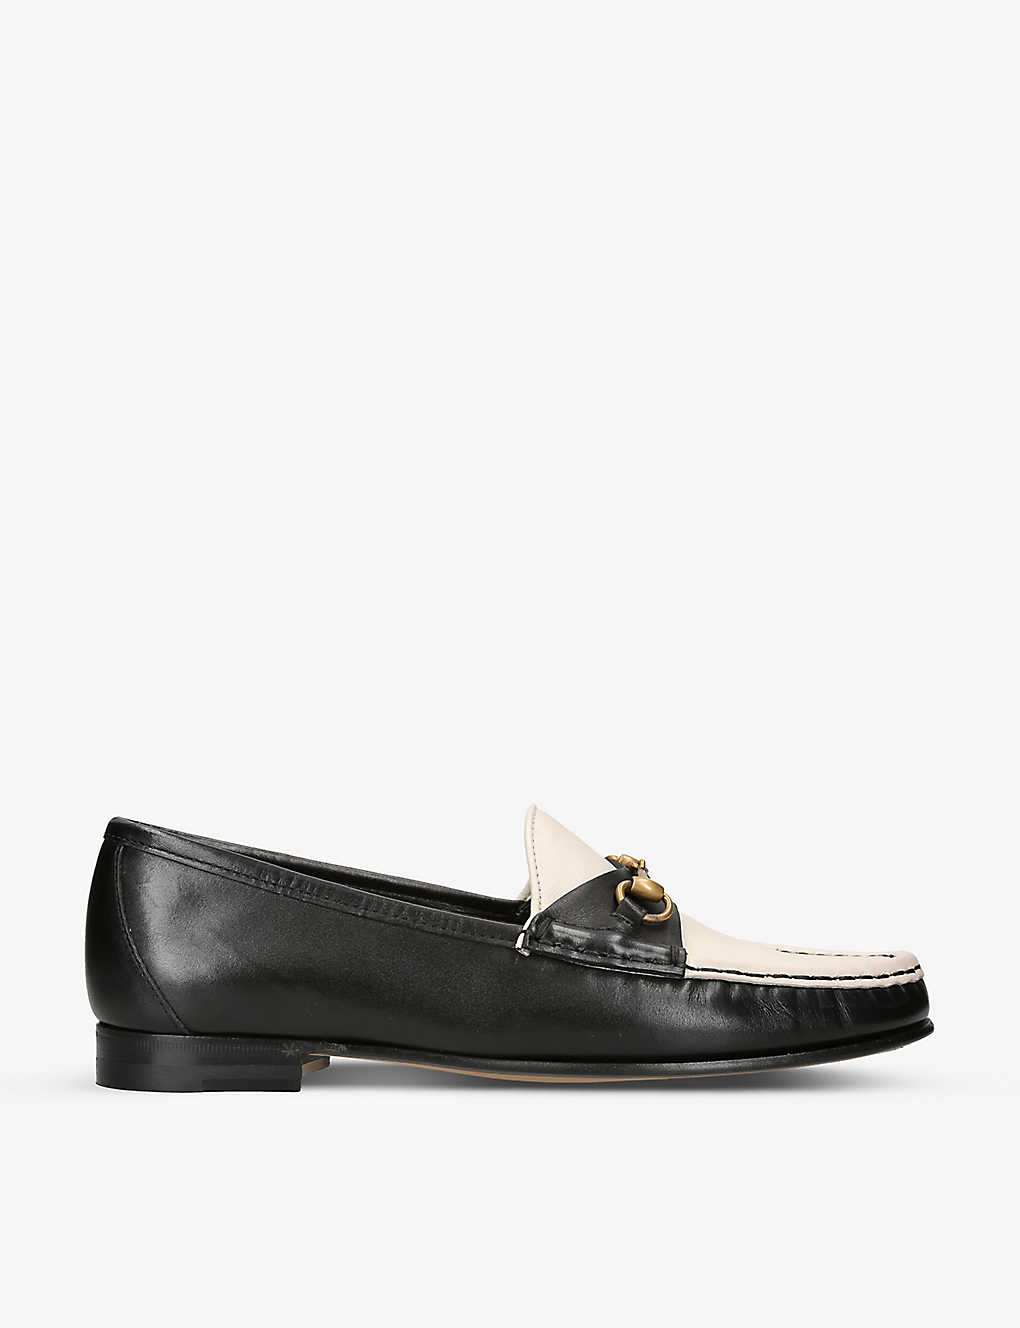 GUCCI GUCCI WOMEN'S BLK/WHITE FRAME HORSEBIT-DETAILED LEATHER LOAFERS,62635456